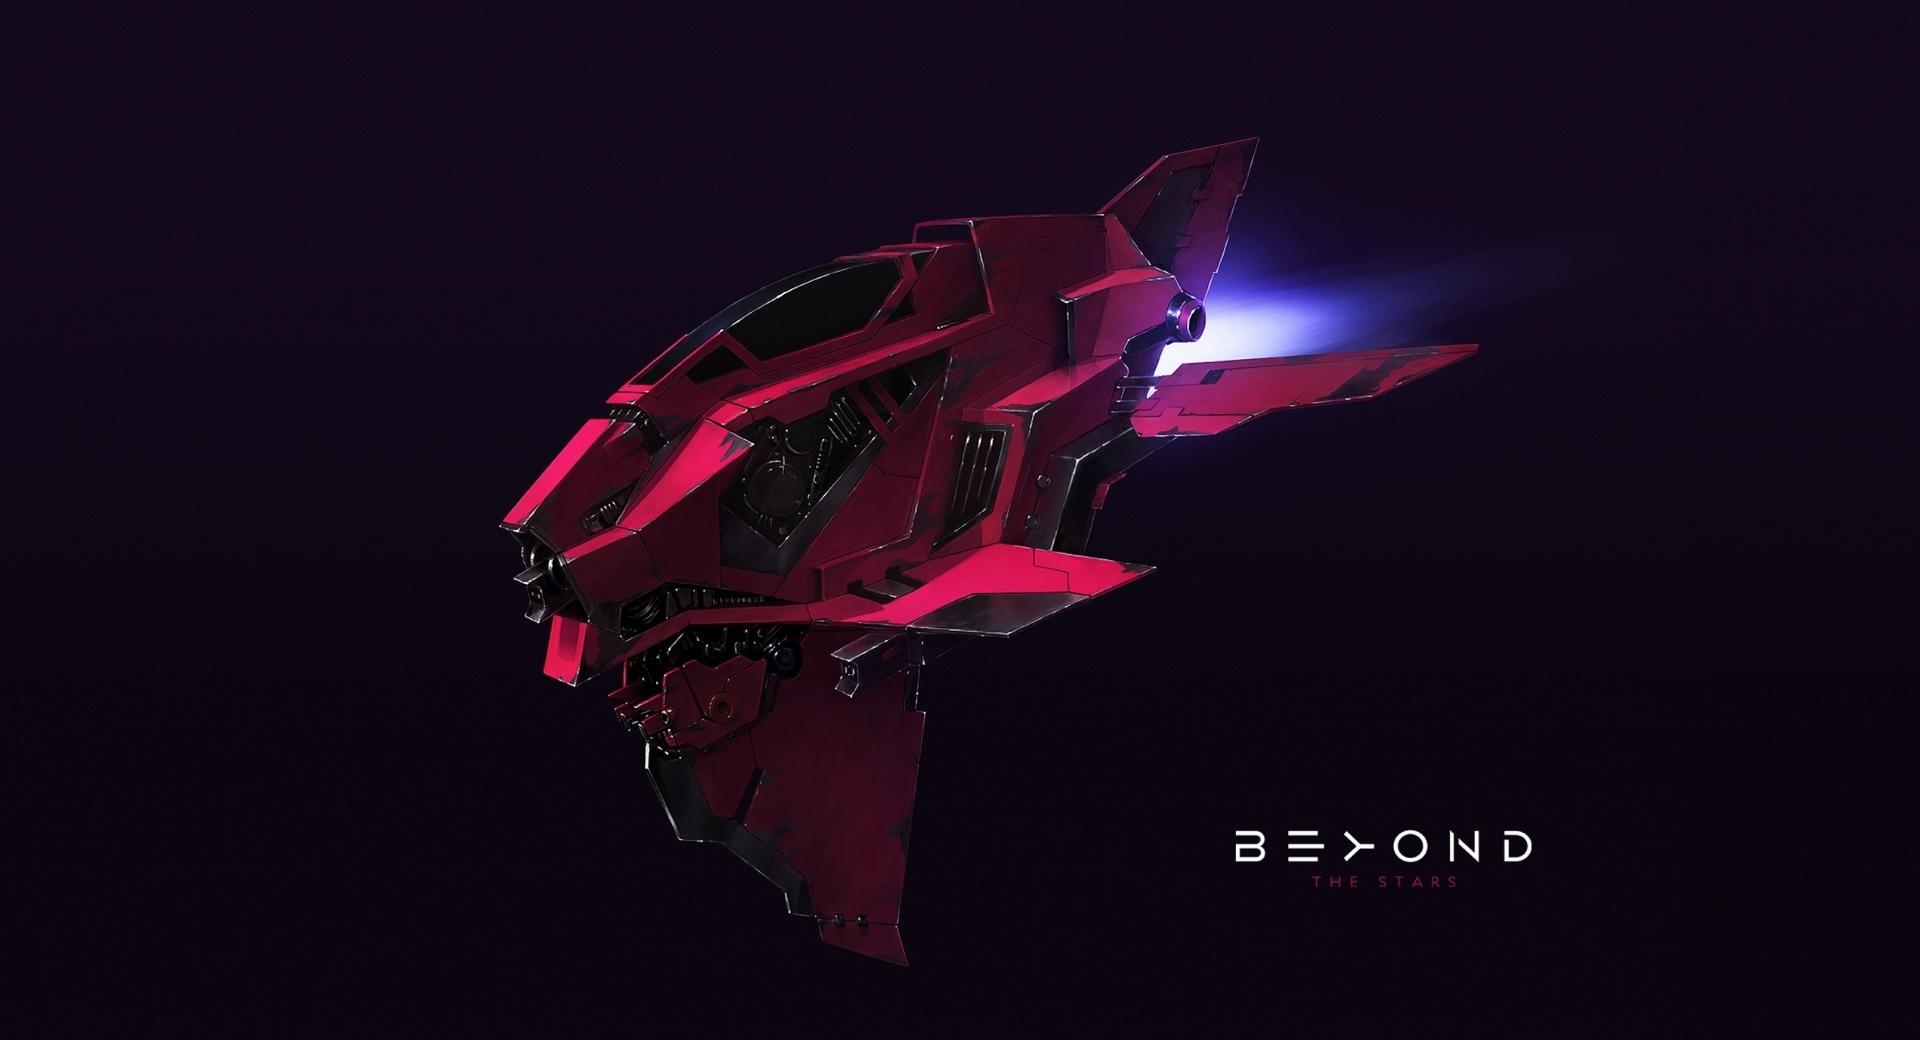 Beyond The Stars wallpapers HD quality